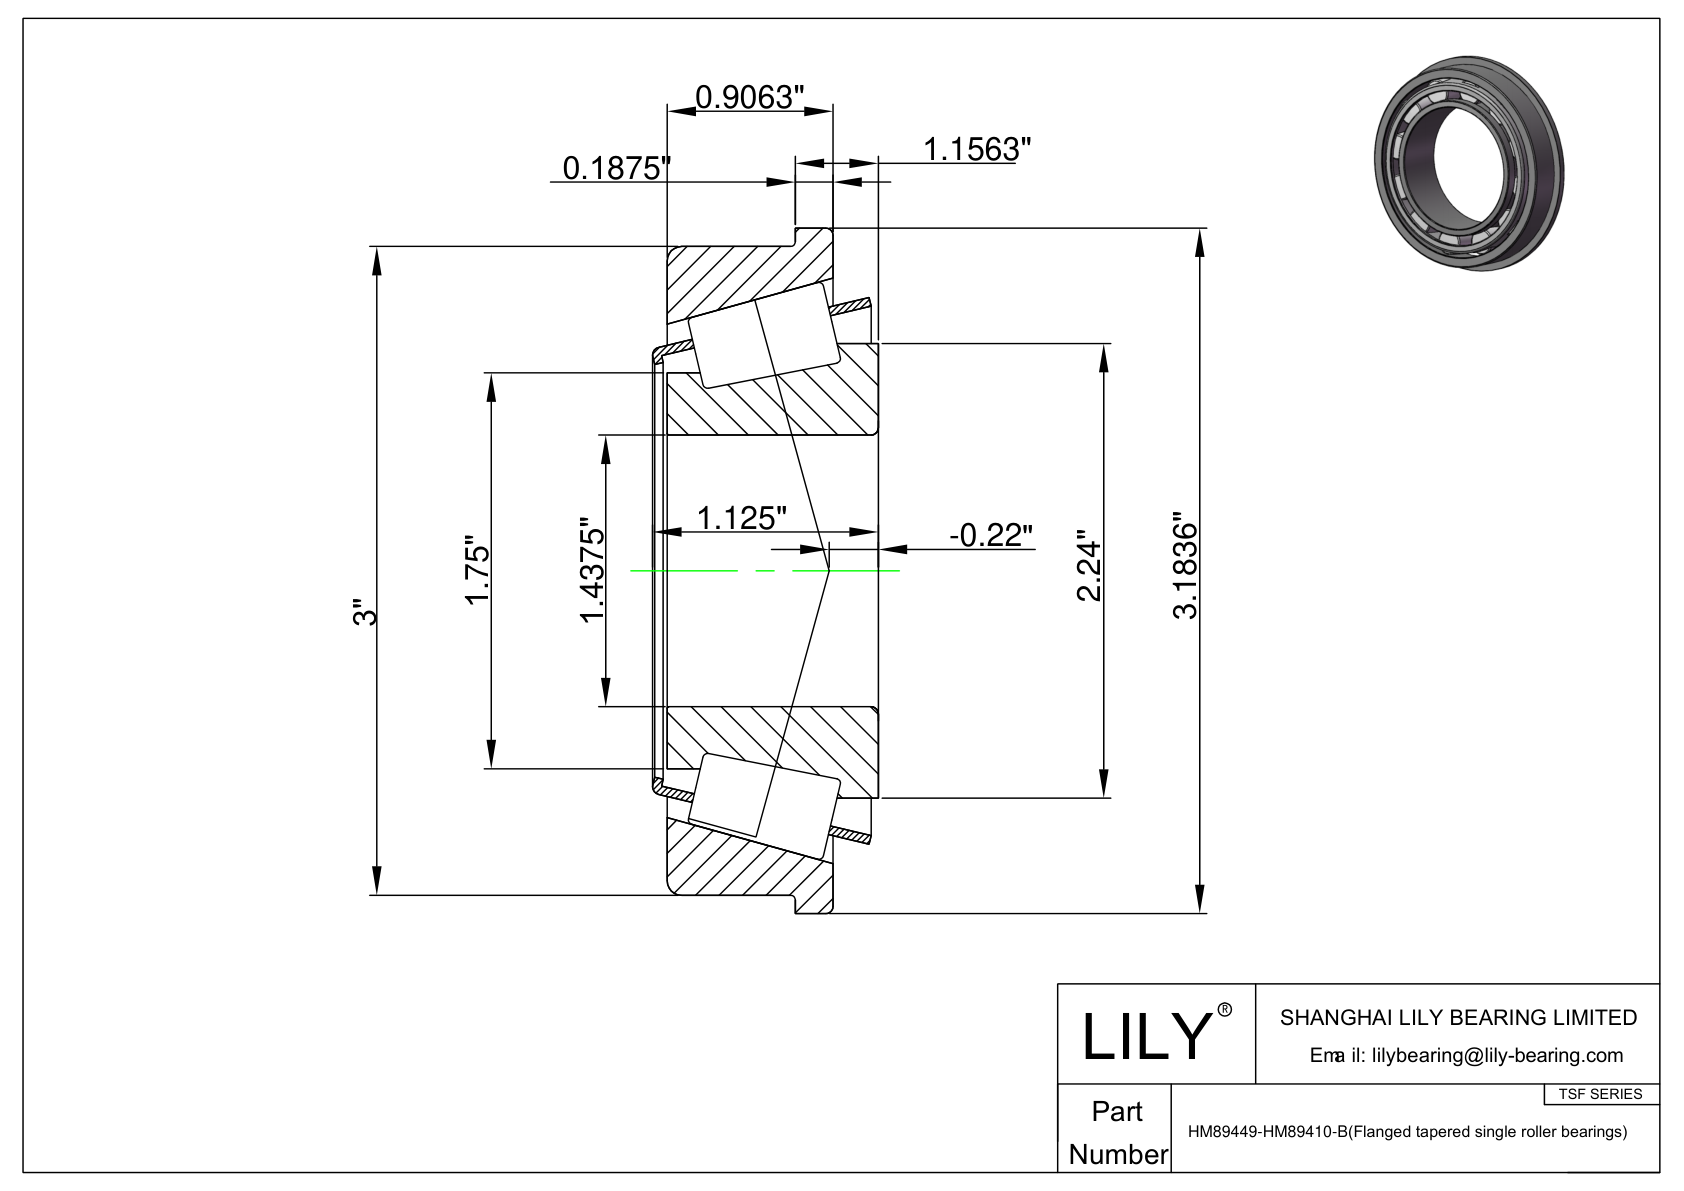 HM89449-HM89410-B TSF (Tapered Single Roller Bearings with Flange) (Imperial) cad drawing